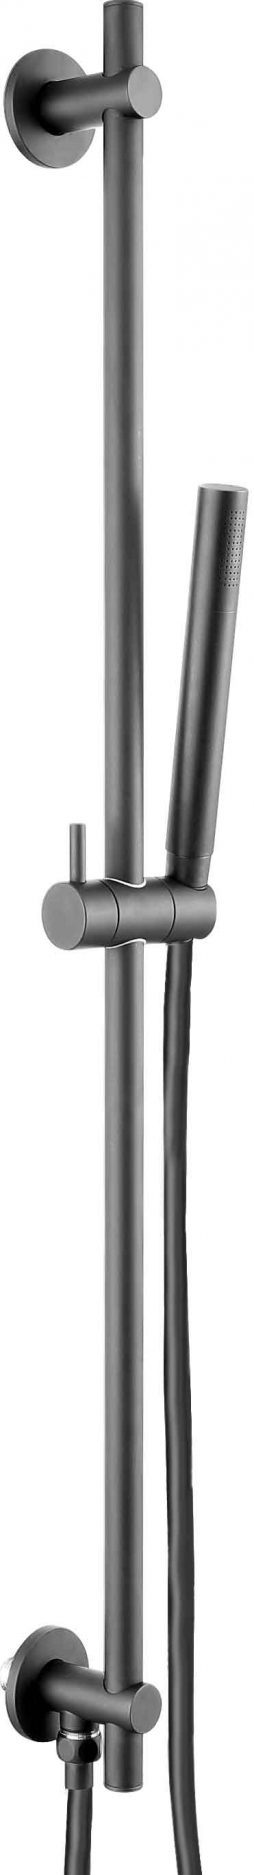 VOS slide rail with single function hand shower and hose, LP 0.2